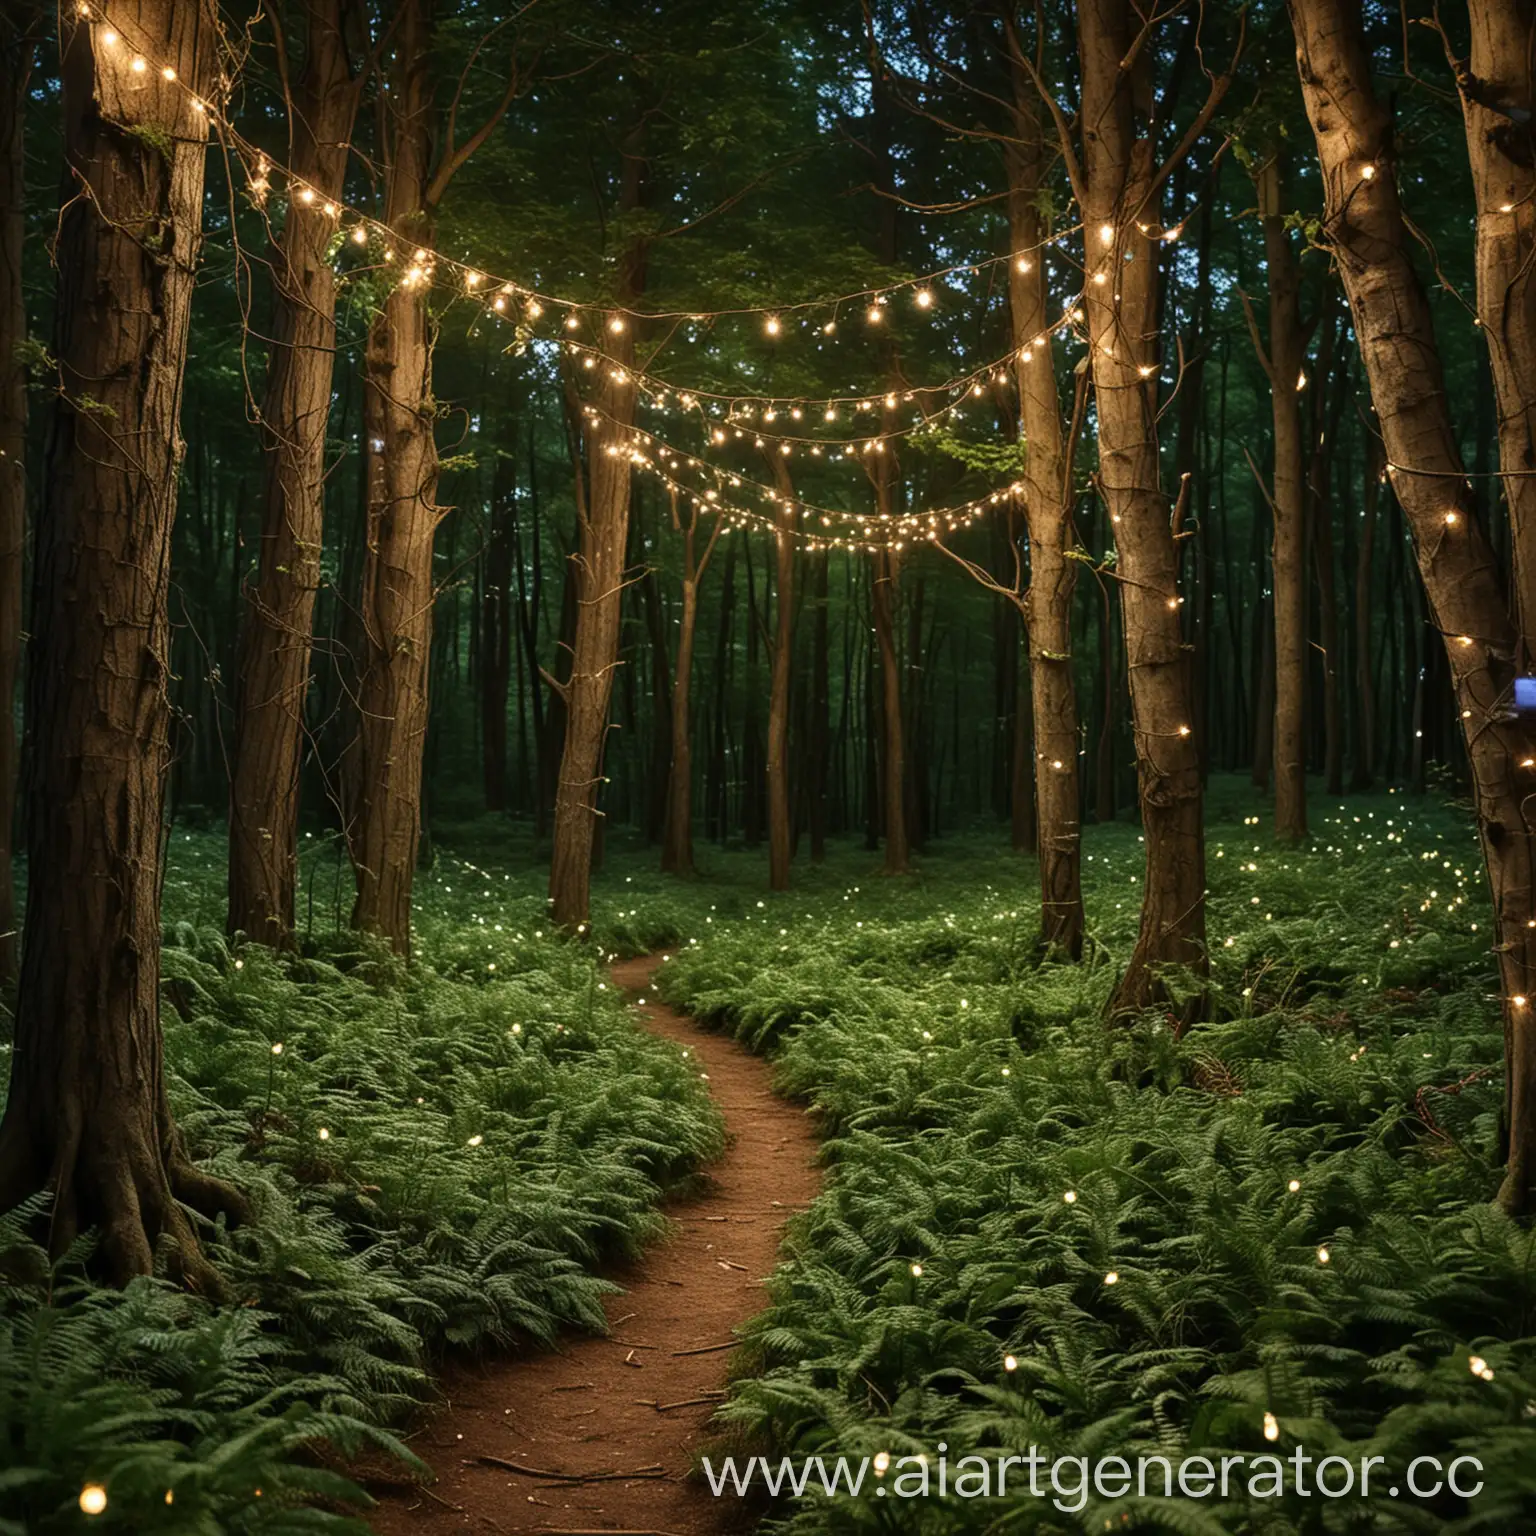 Enchanted-Forest-Illuminated-by-Twinkling-Fairy-Lights